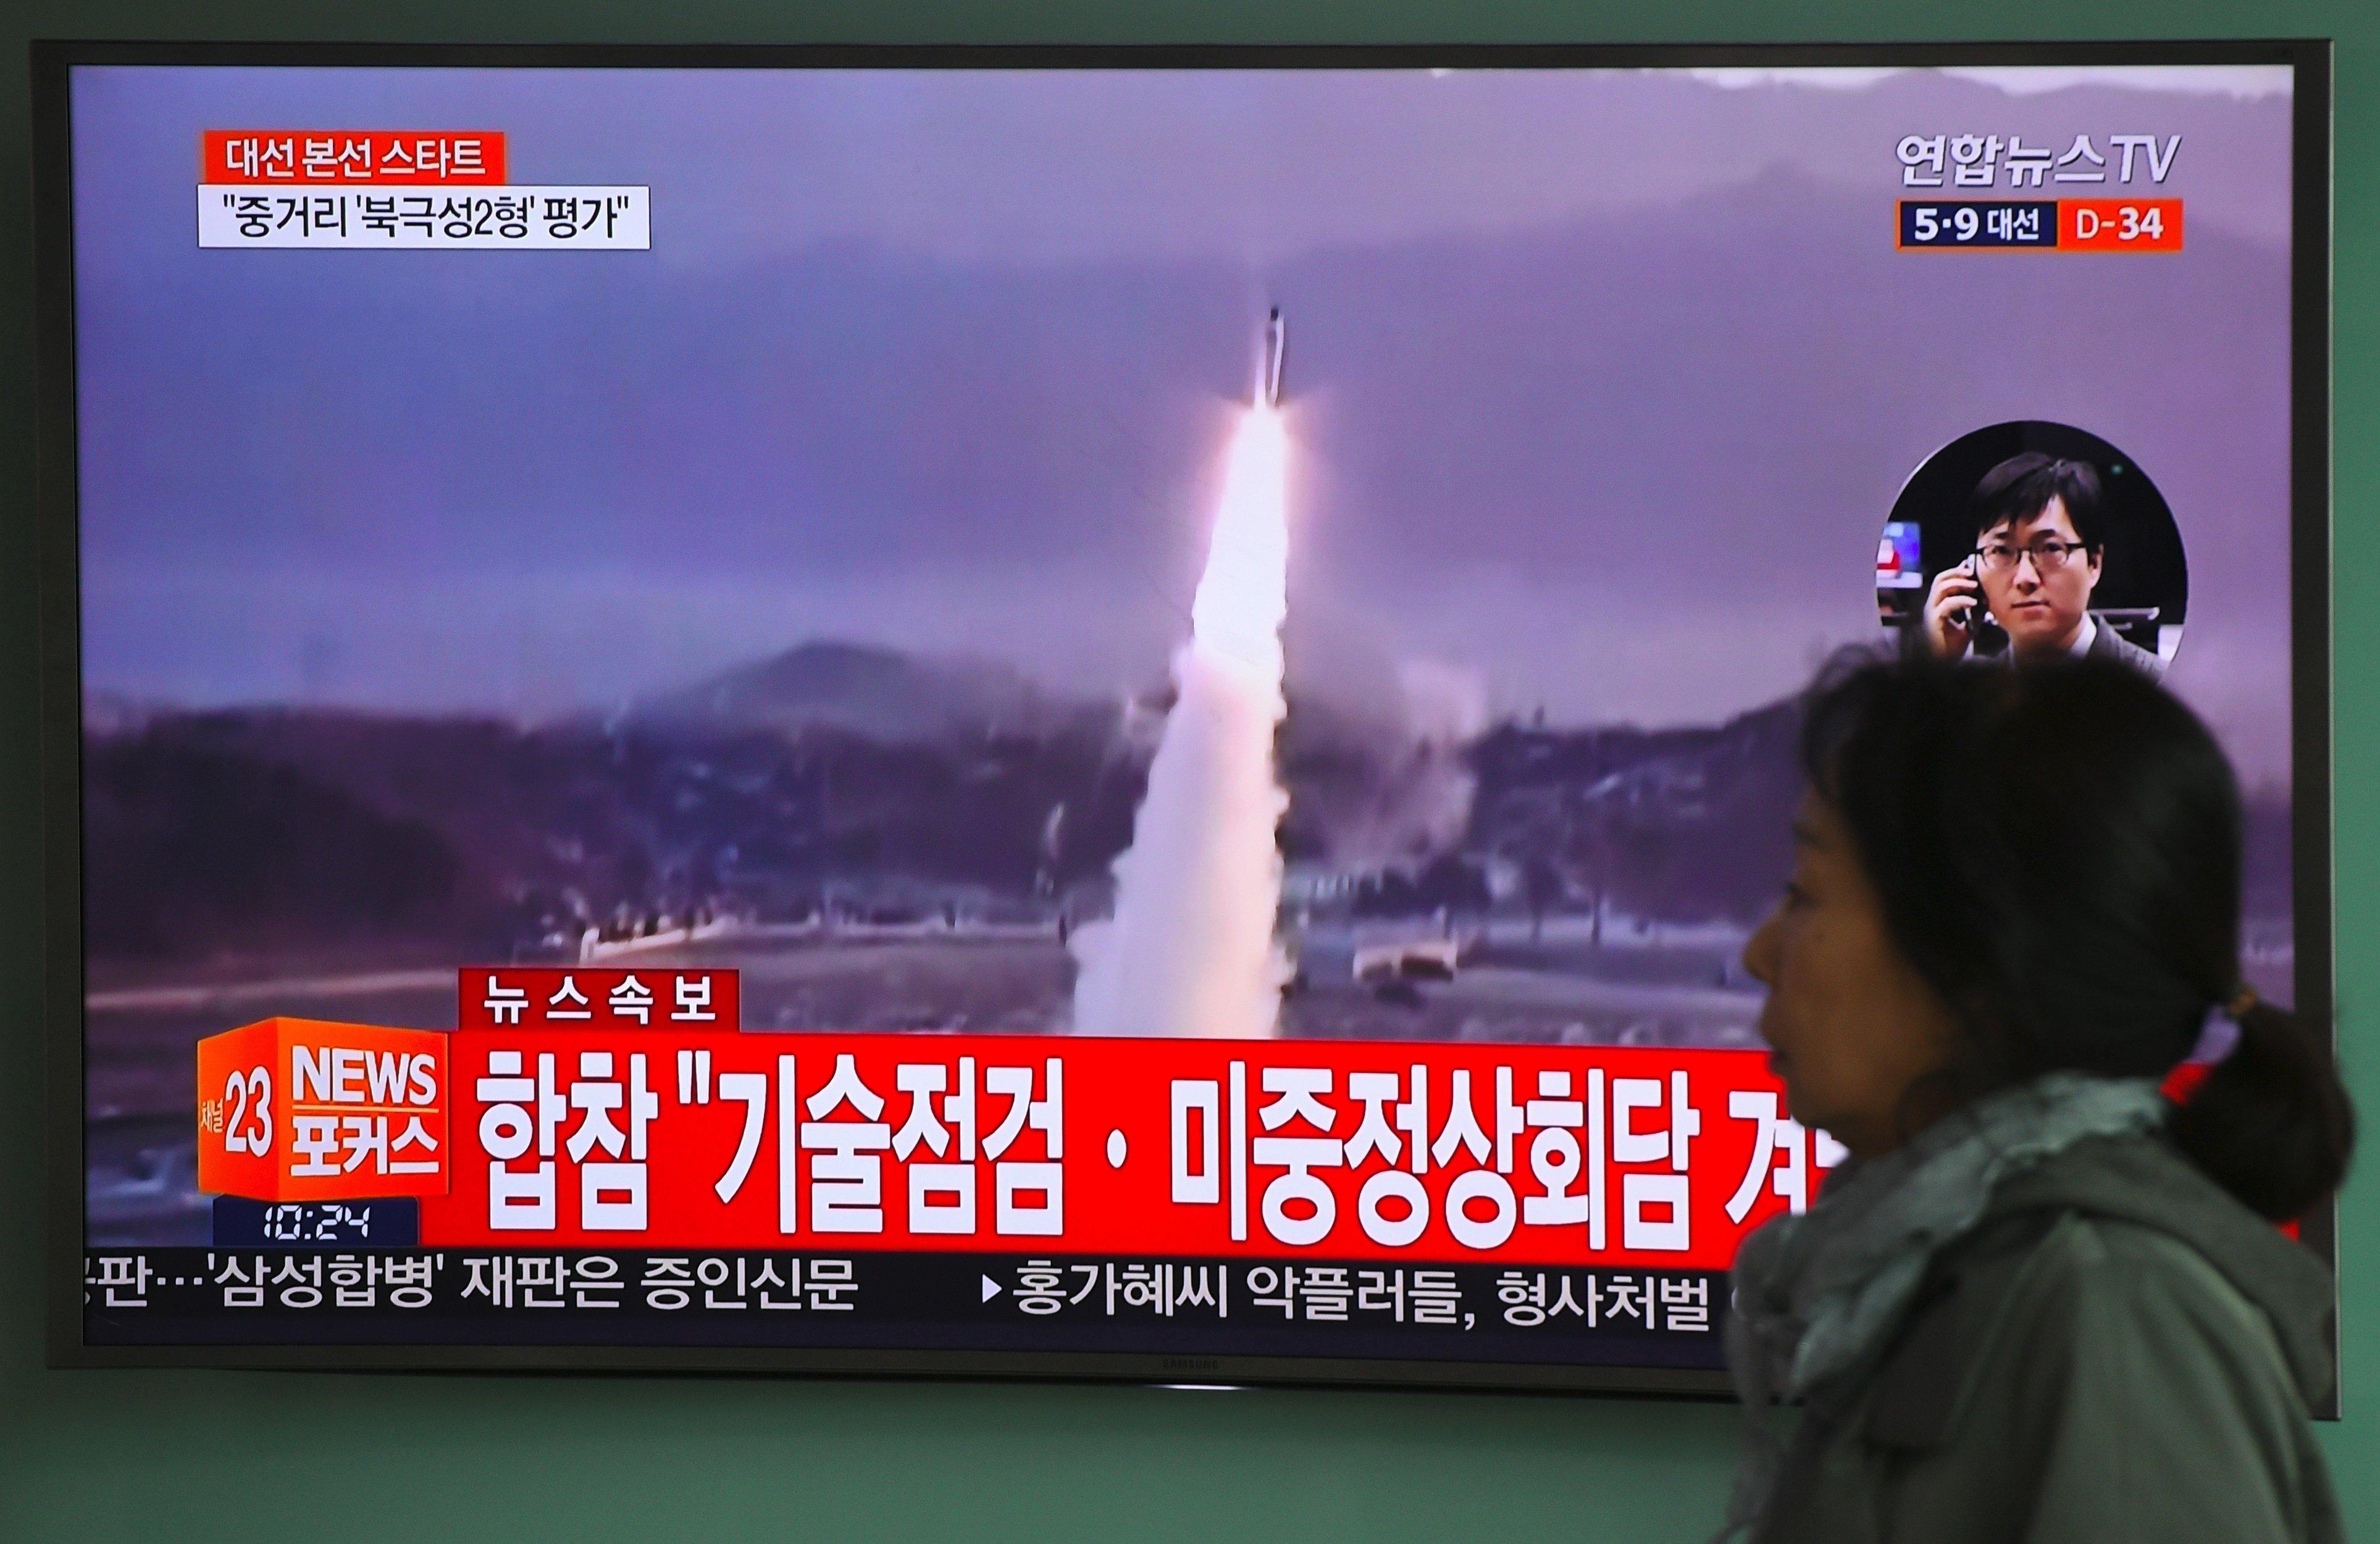 A nuclear attack on South Korea tv